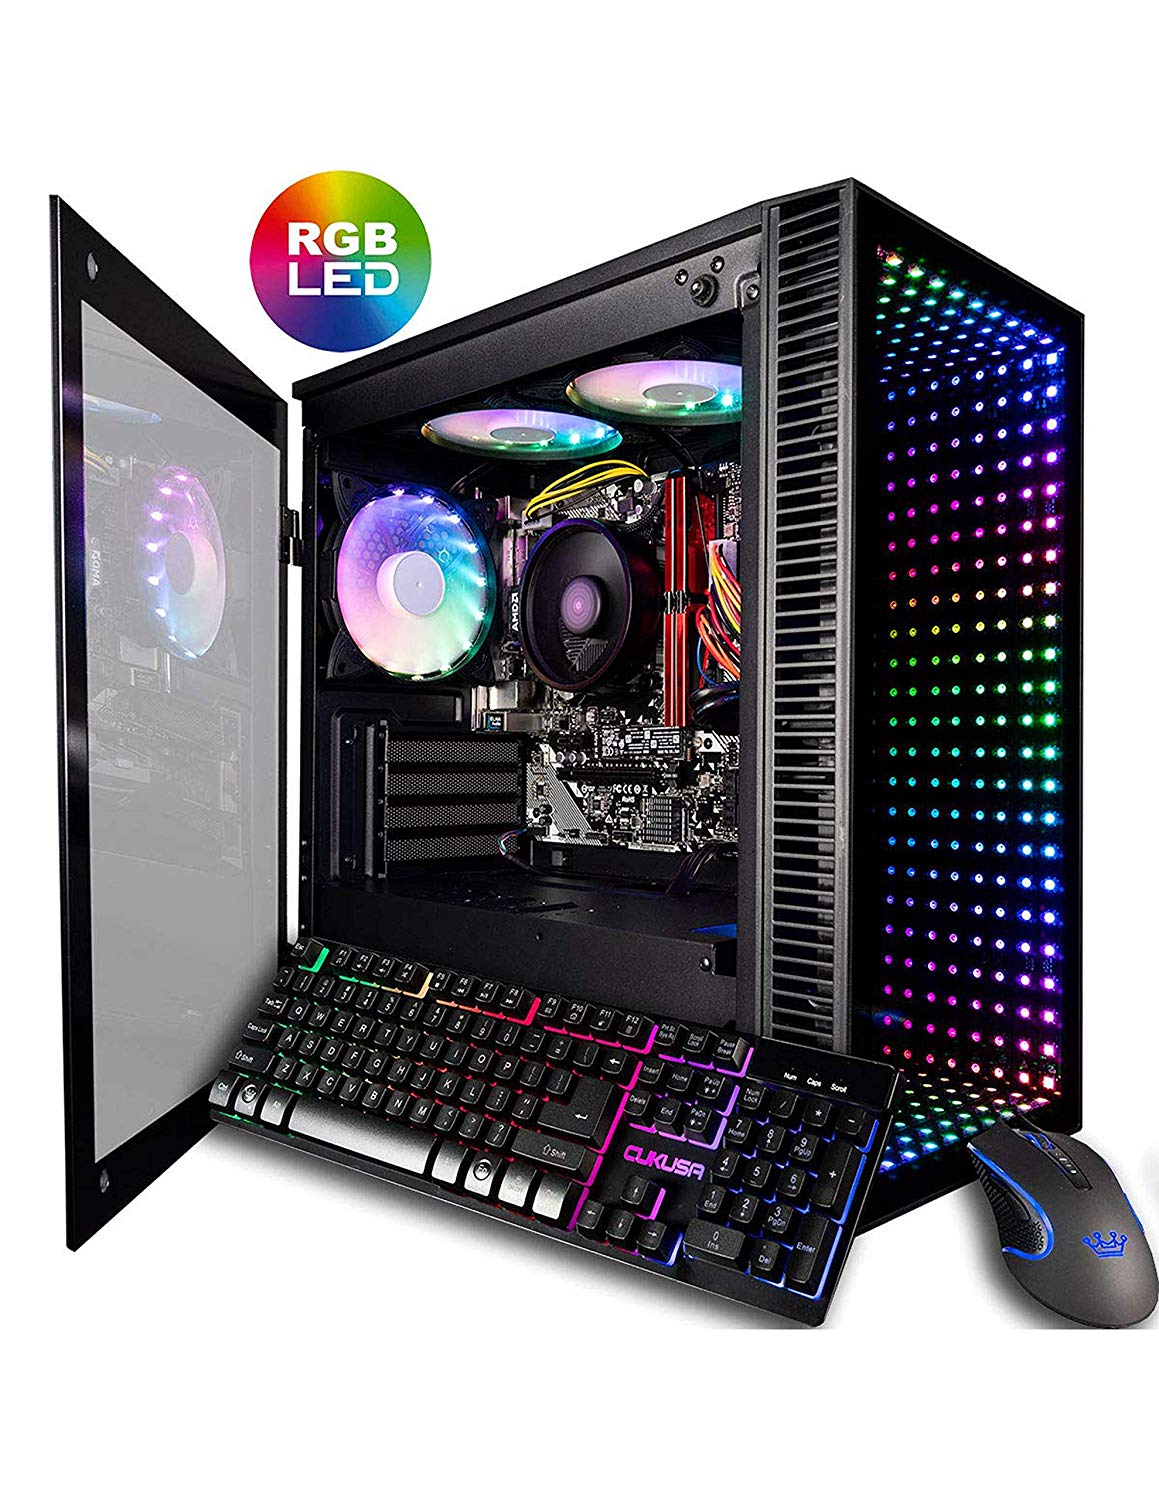 Best How Much Would A Good Gaming Pc Cost To Build in Bedroom